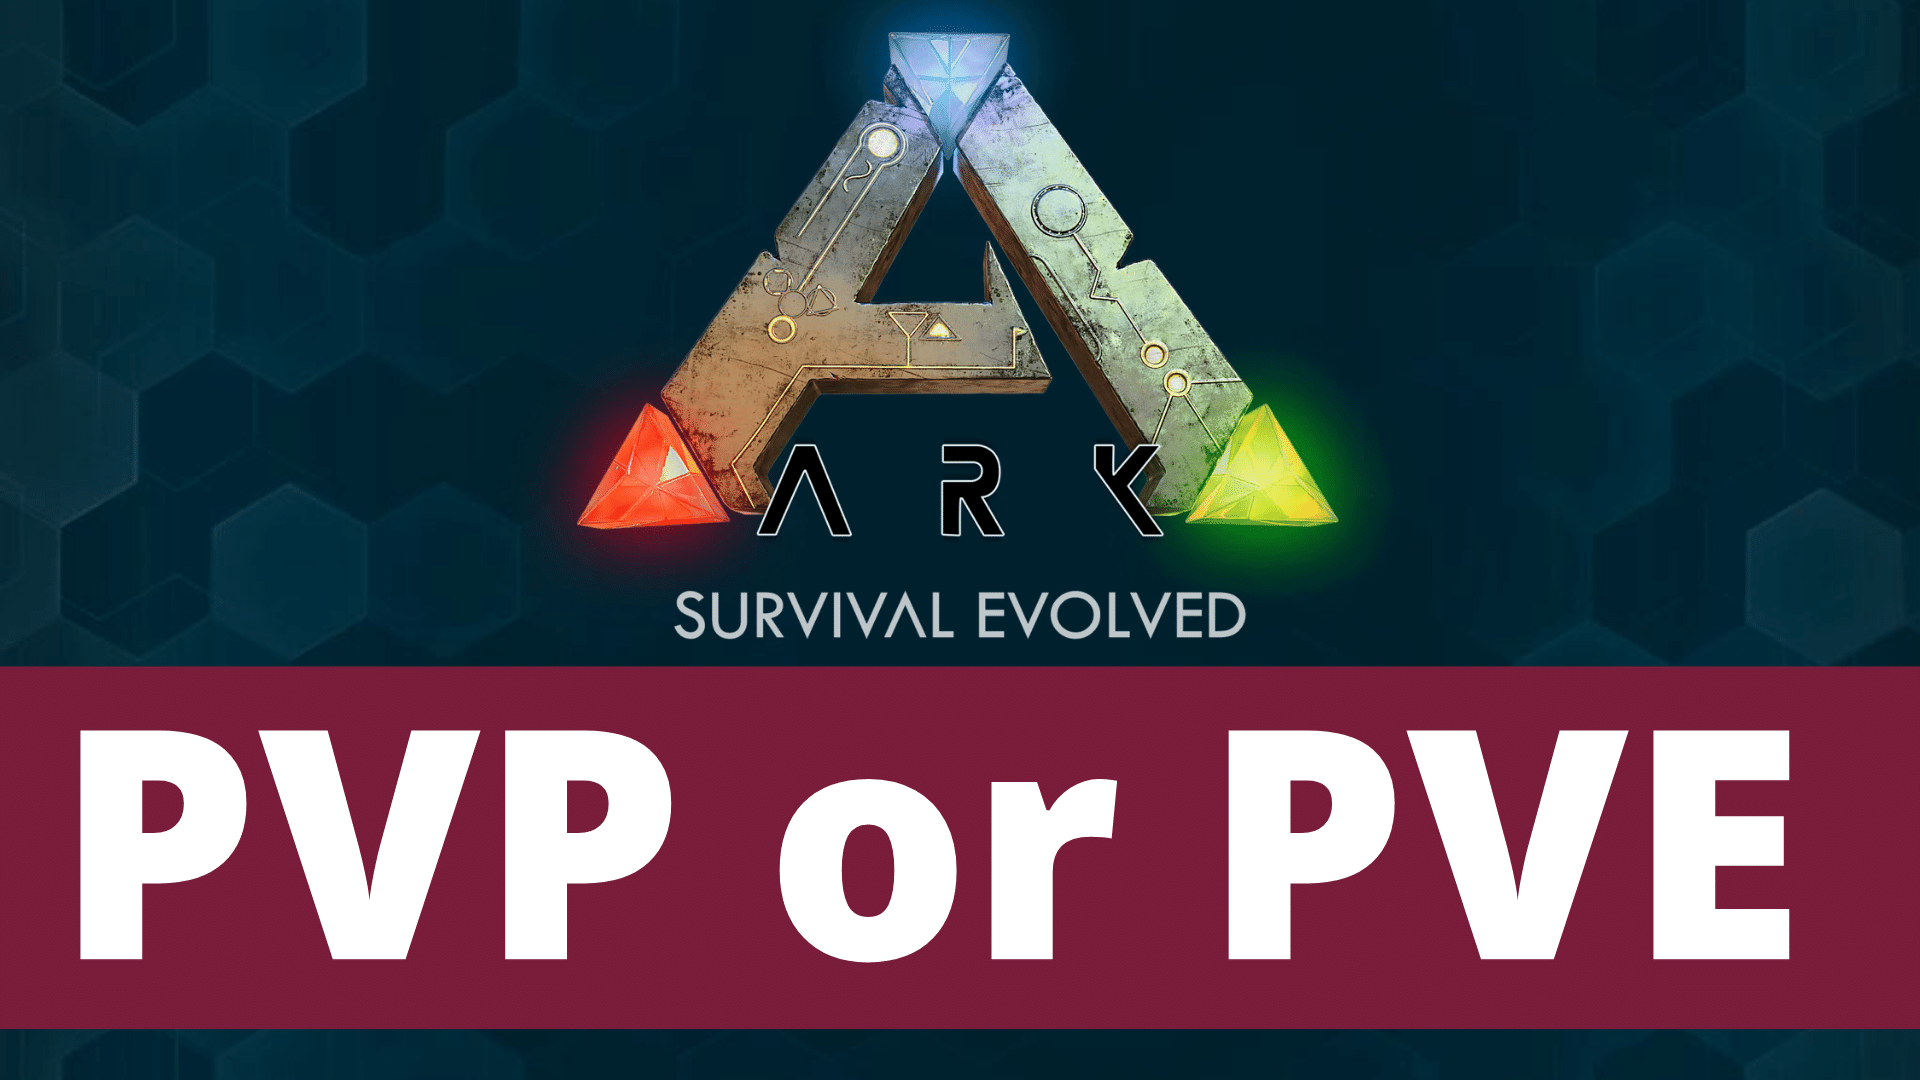 PVP or PVE